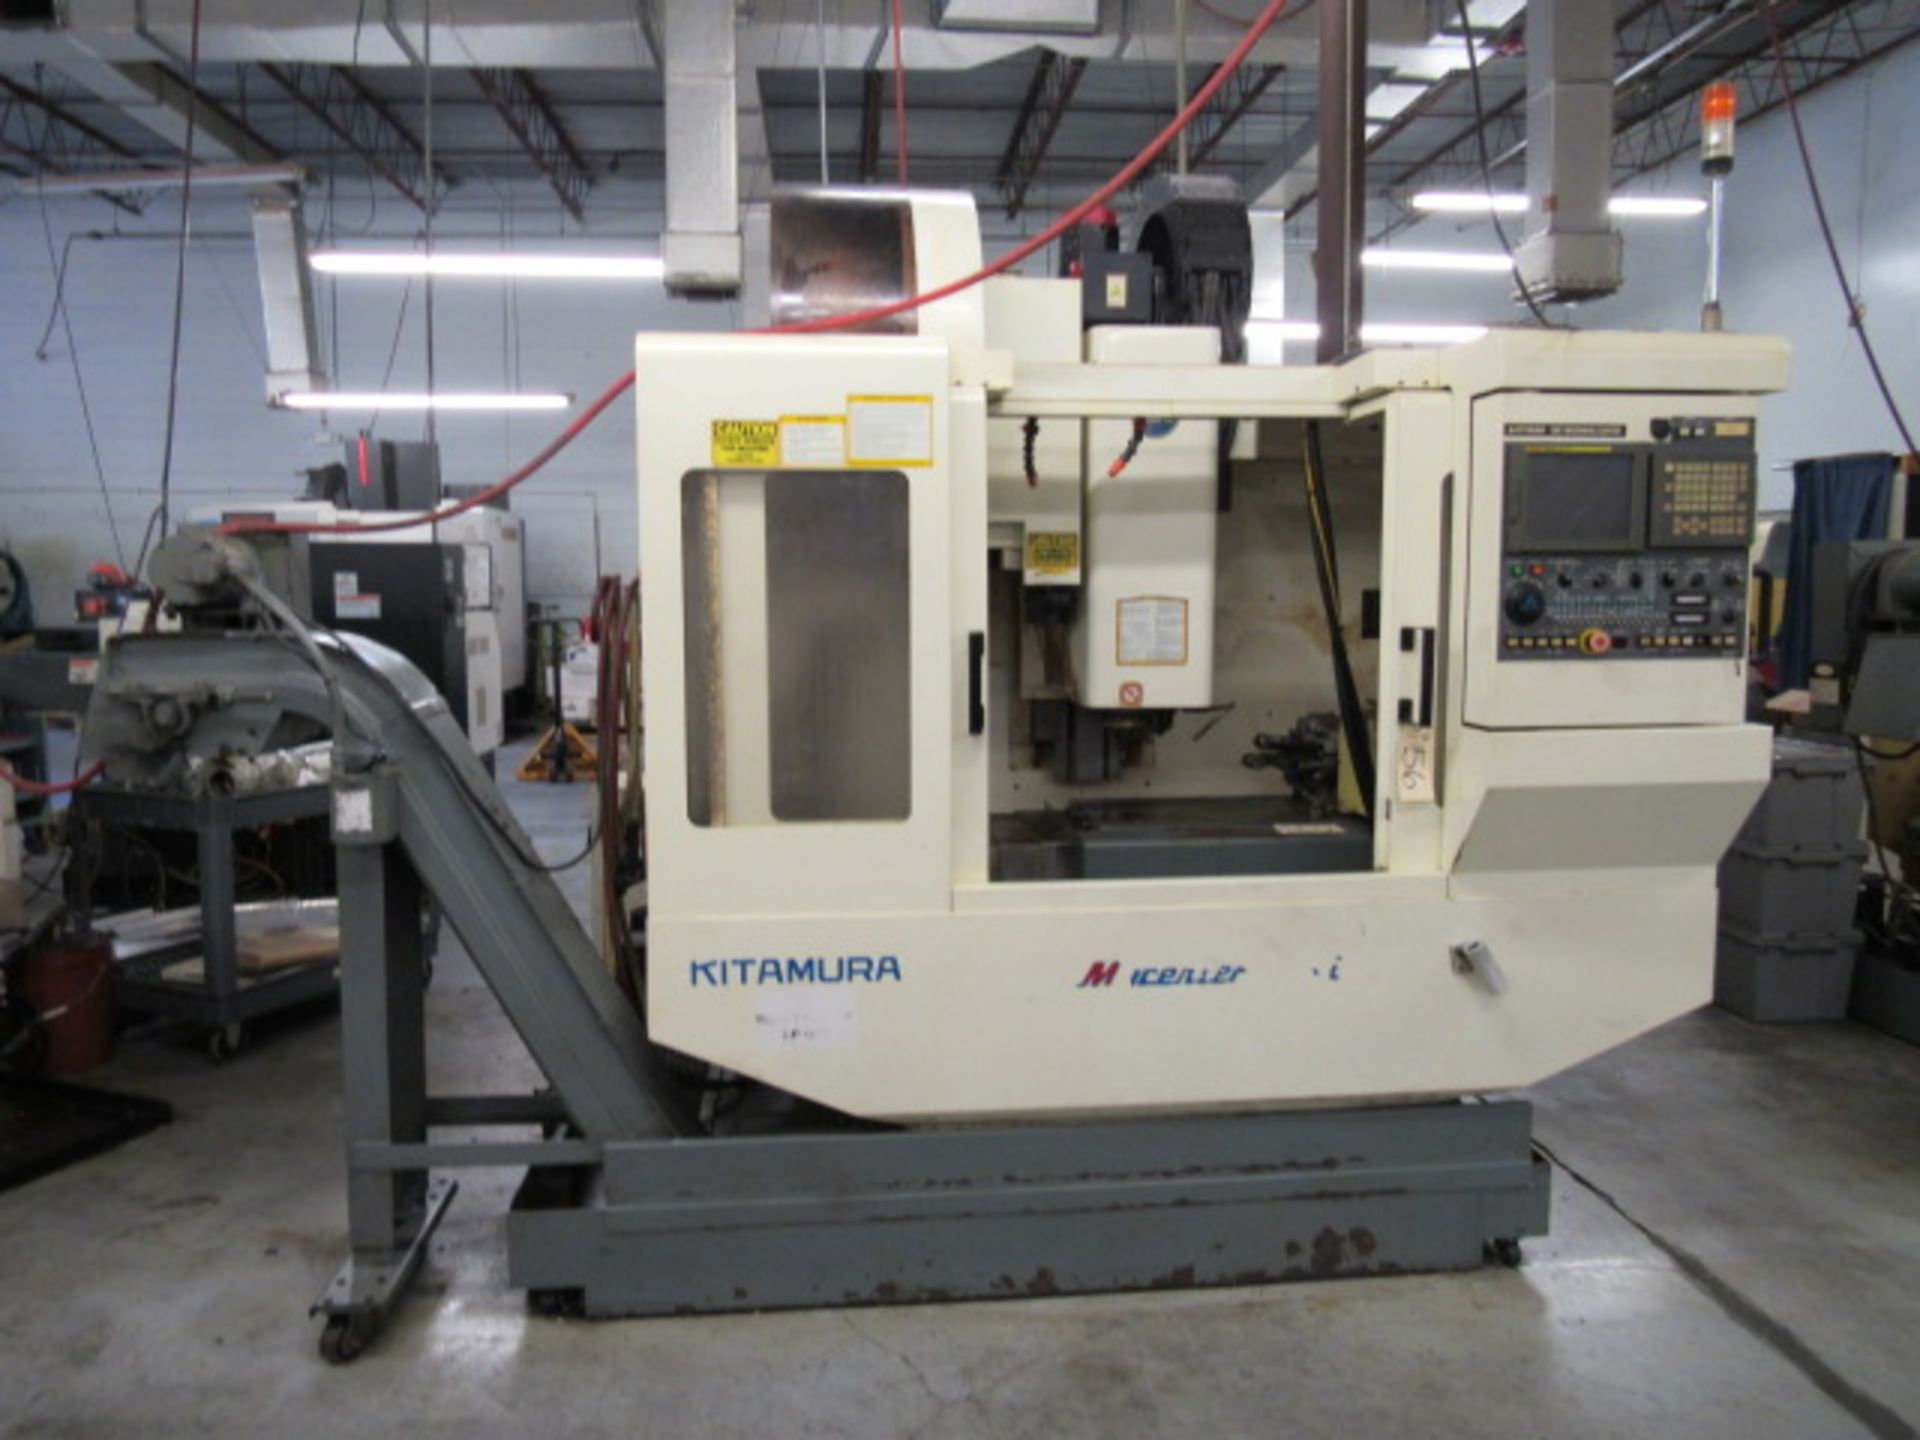 Kitamura MyCenter 3X/3Xi Wired for 4th Axis CNC Vertical Machining Center - Image 2 of 8